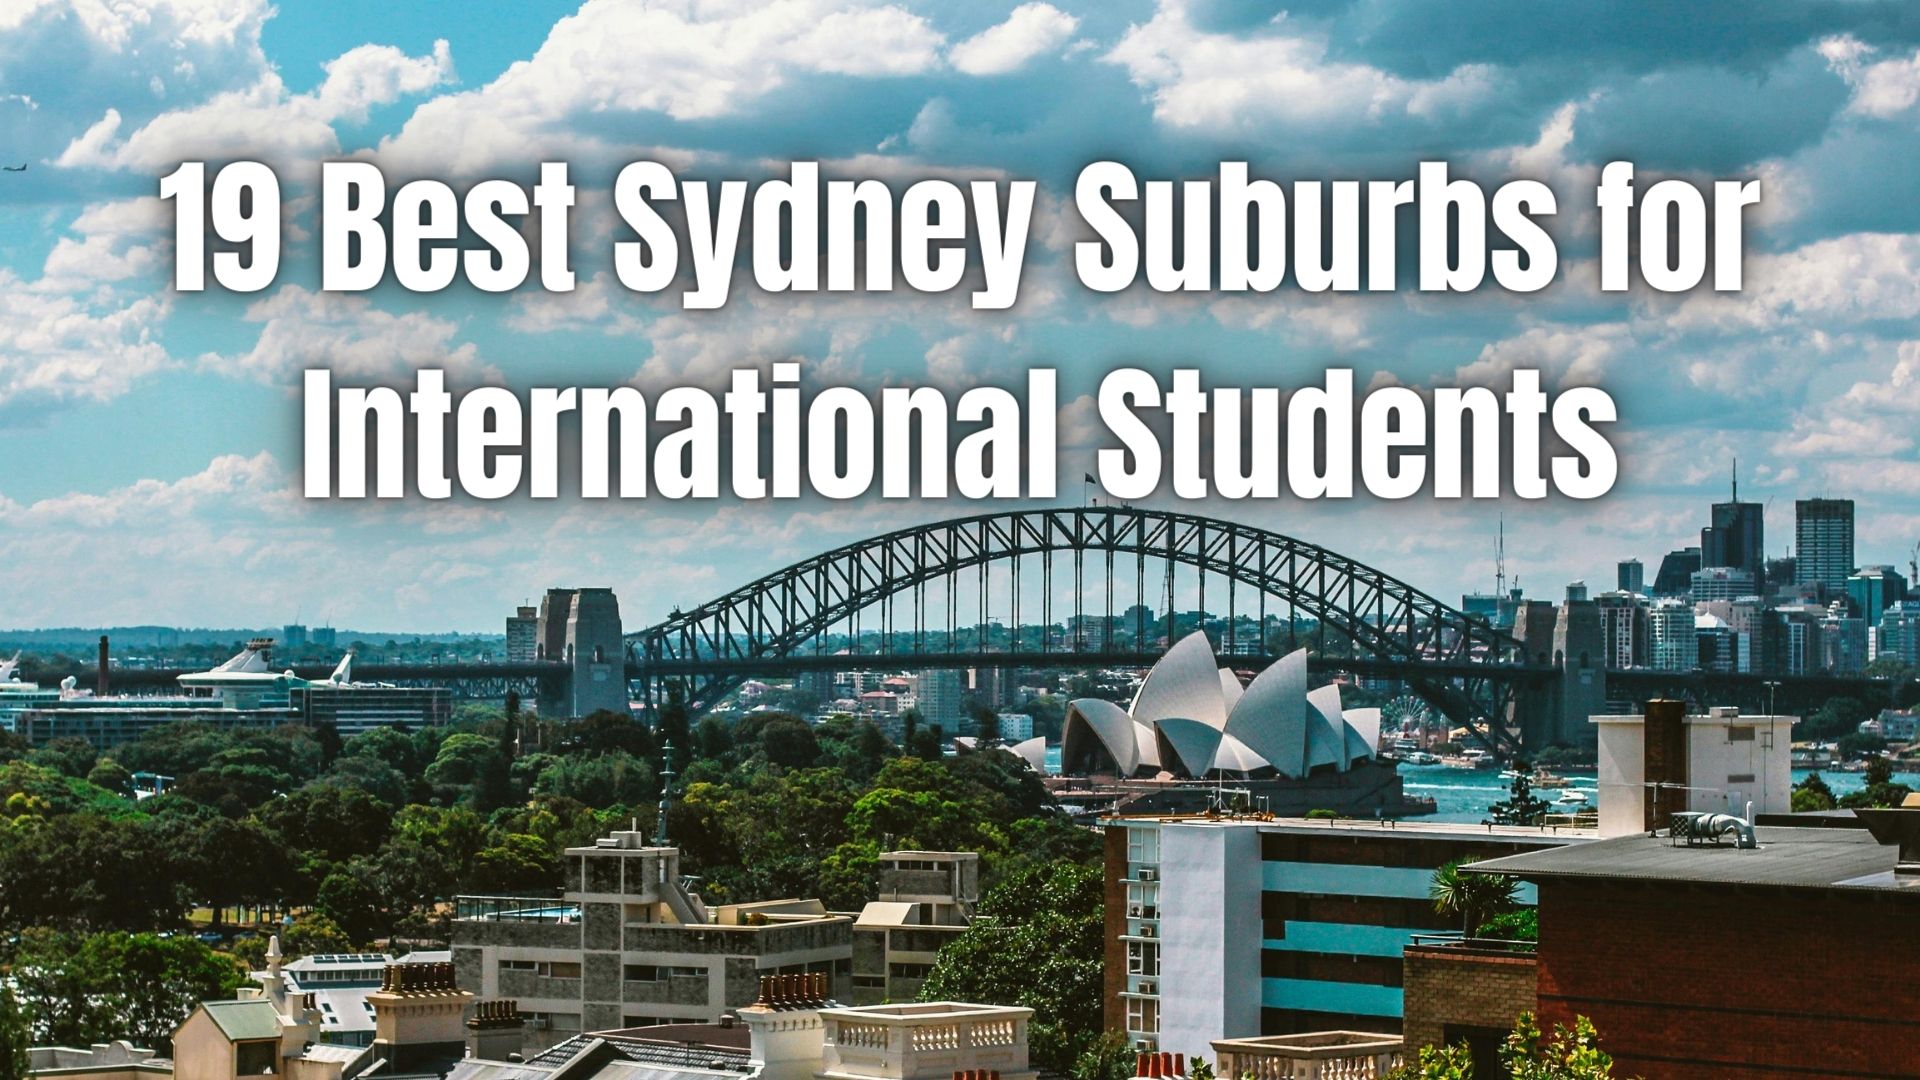 Top suburbs for international students in Sydney. Discover housing options and exceptional amenities for enriching the student experience.